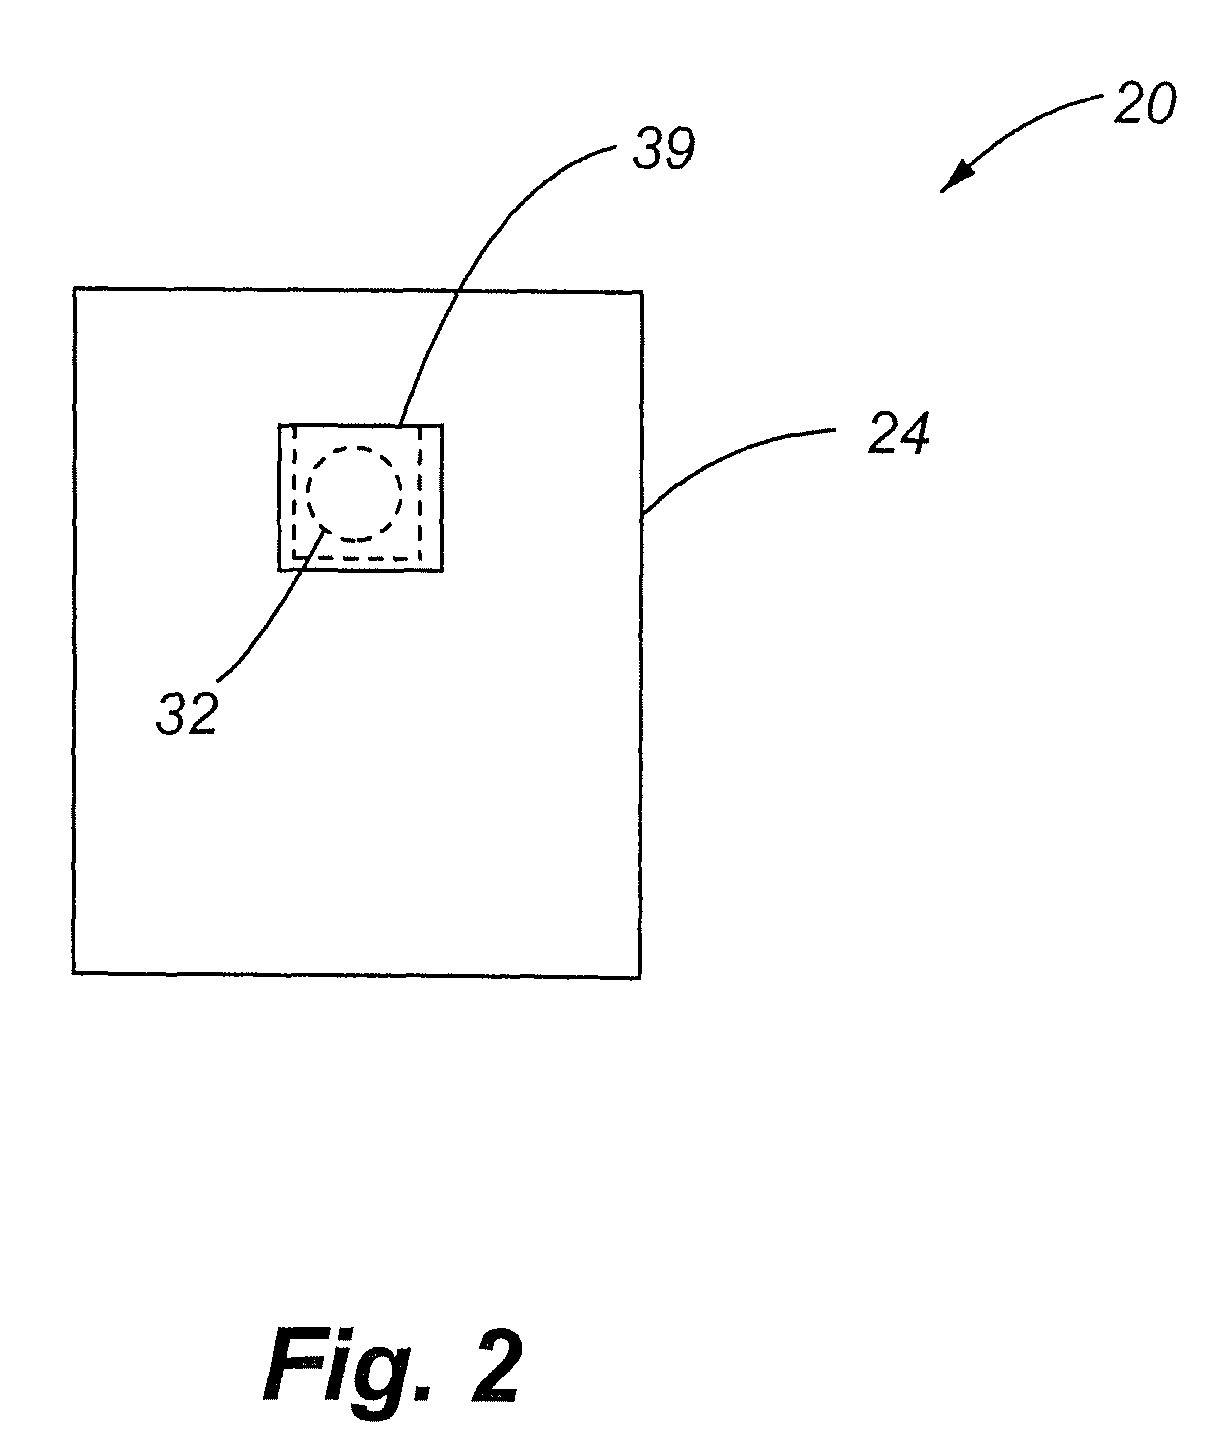 Method for securing a beverage container to a mounting surface